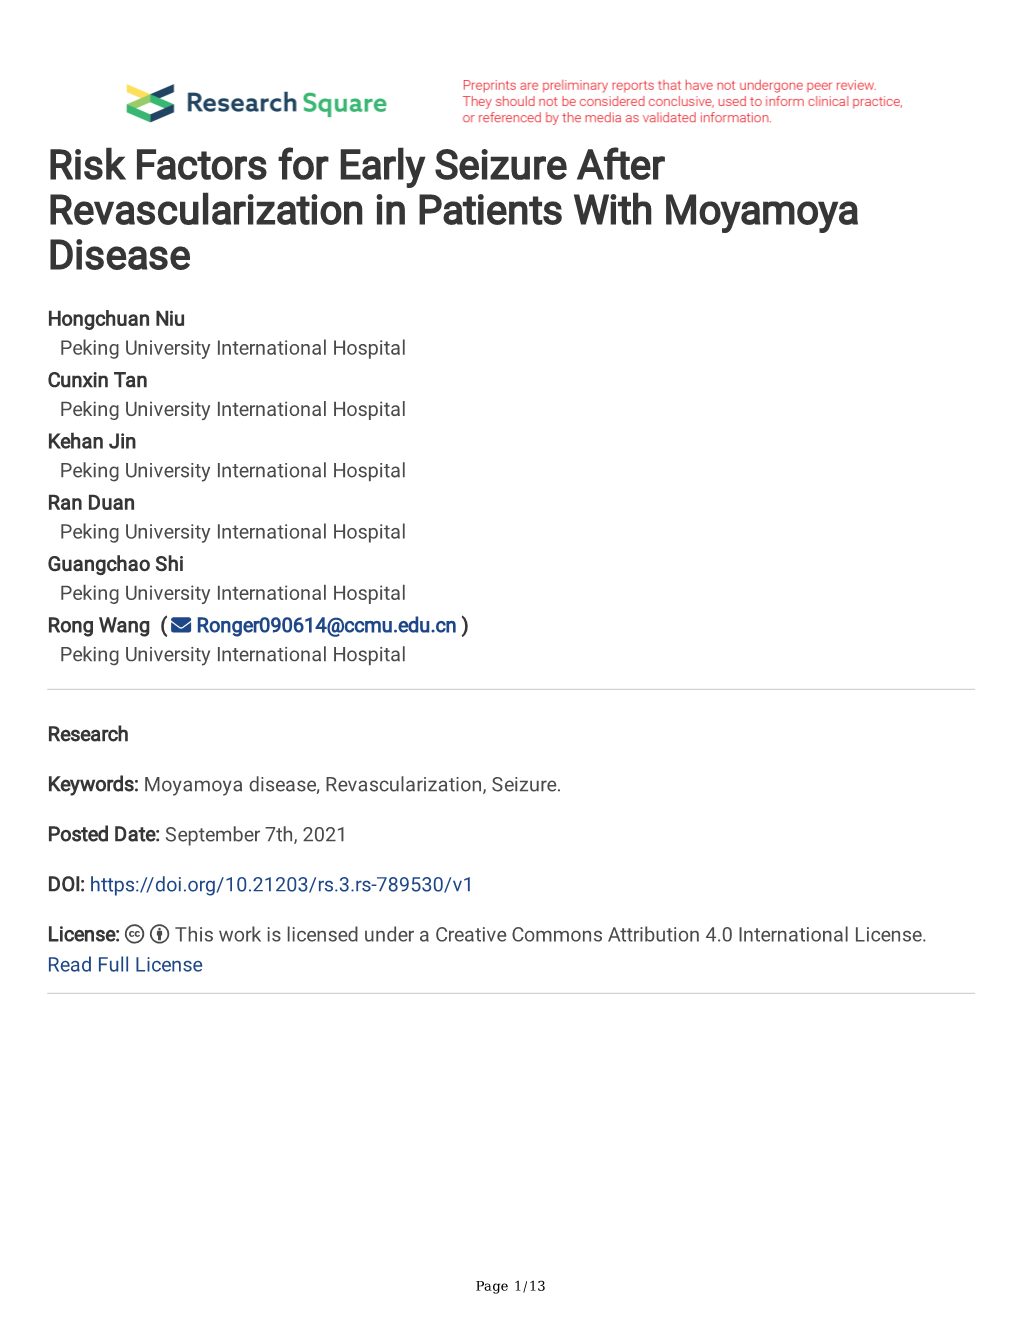 Risk Factors for Early Seizure After Revascularization in Patients with Moyamoya Disease